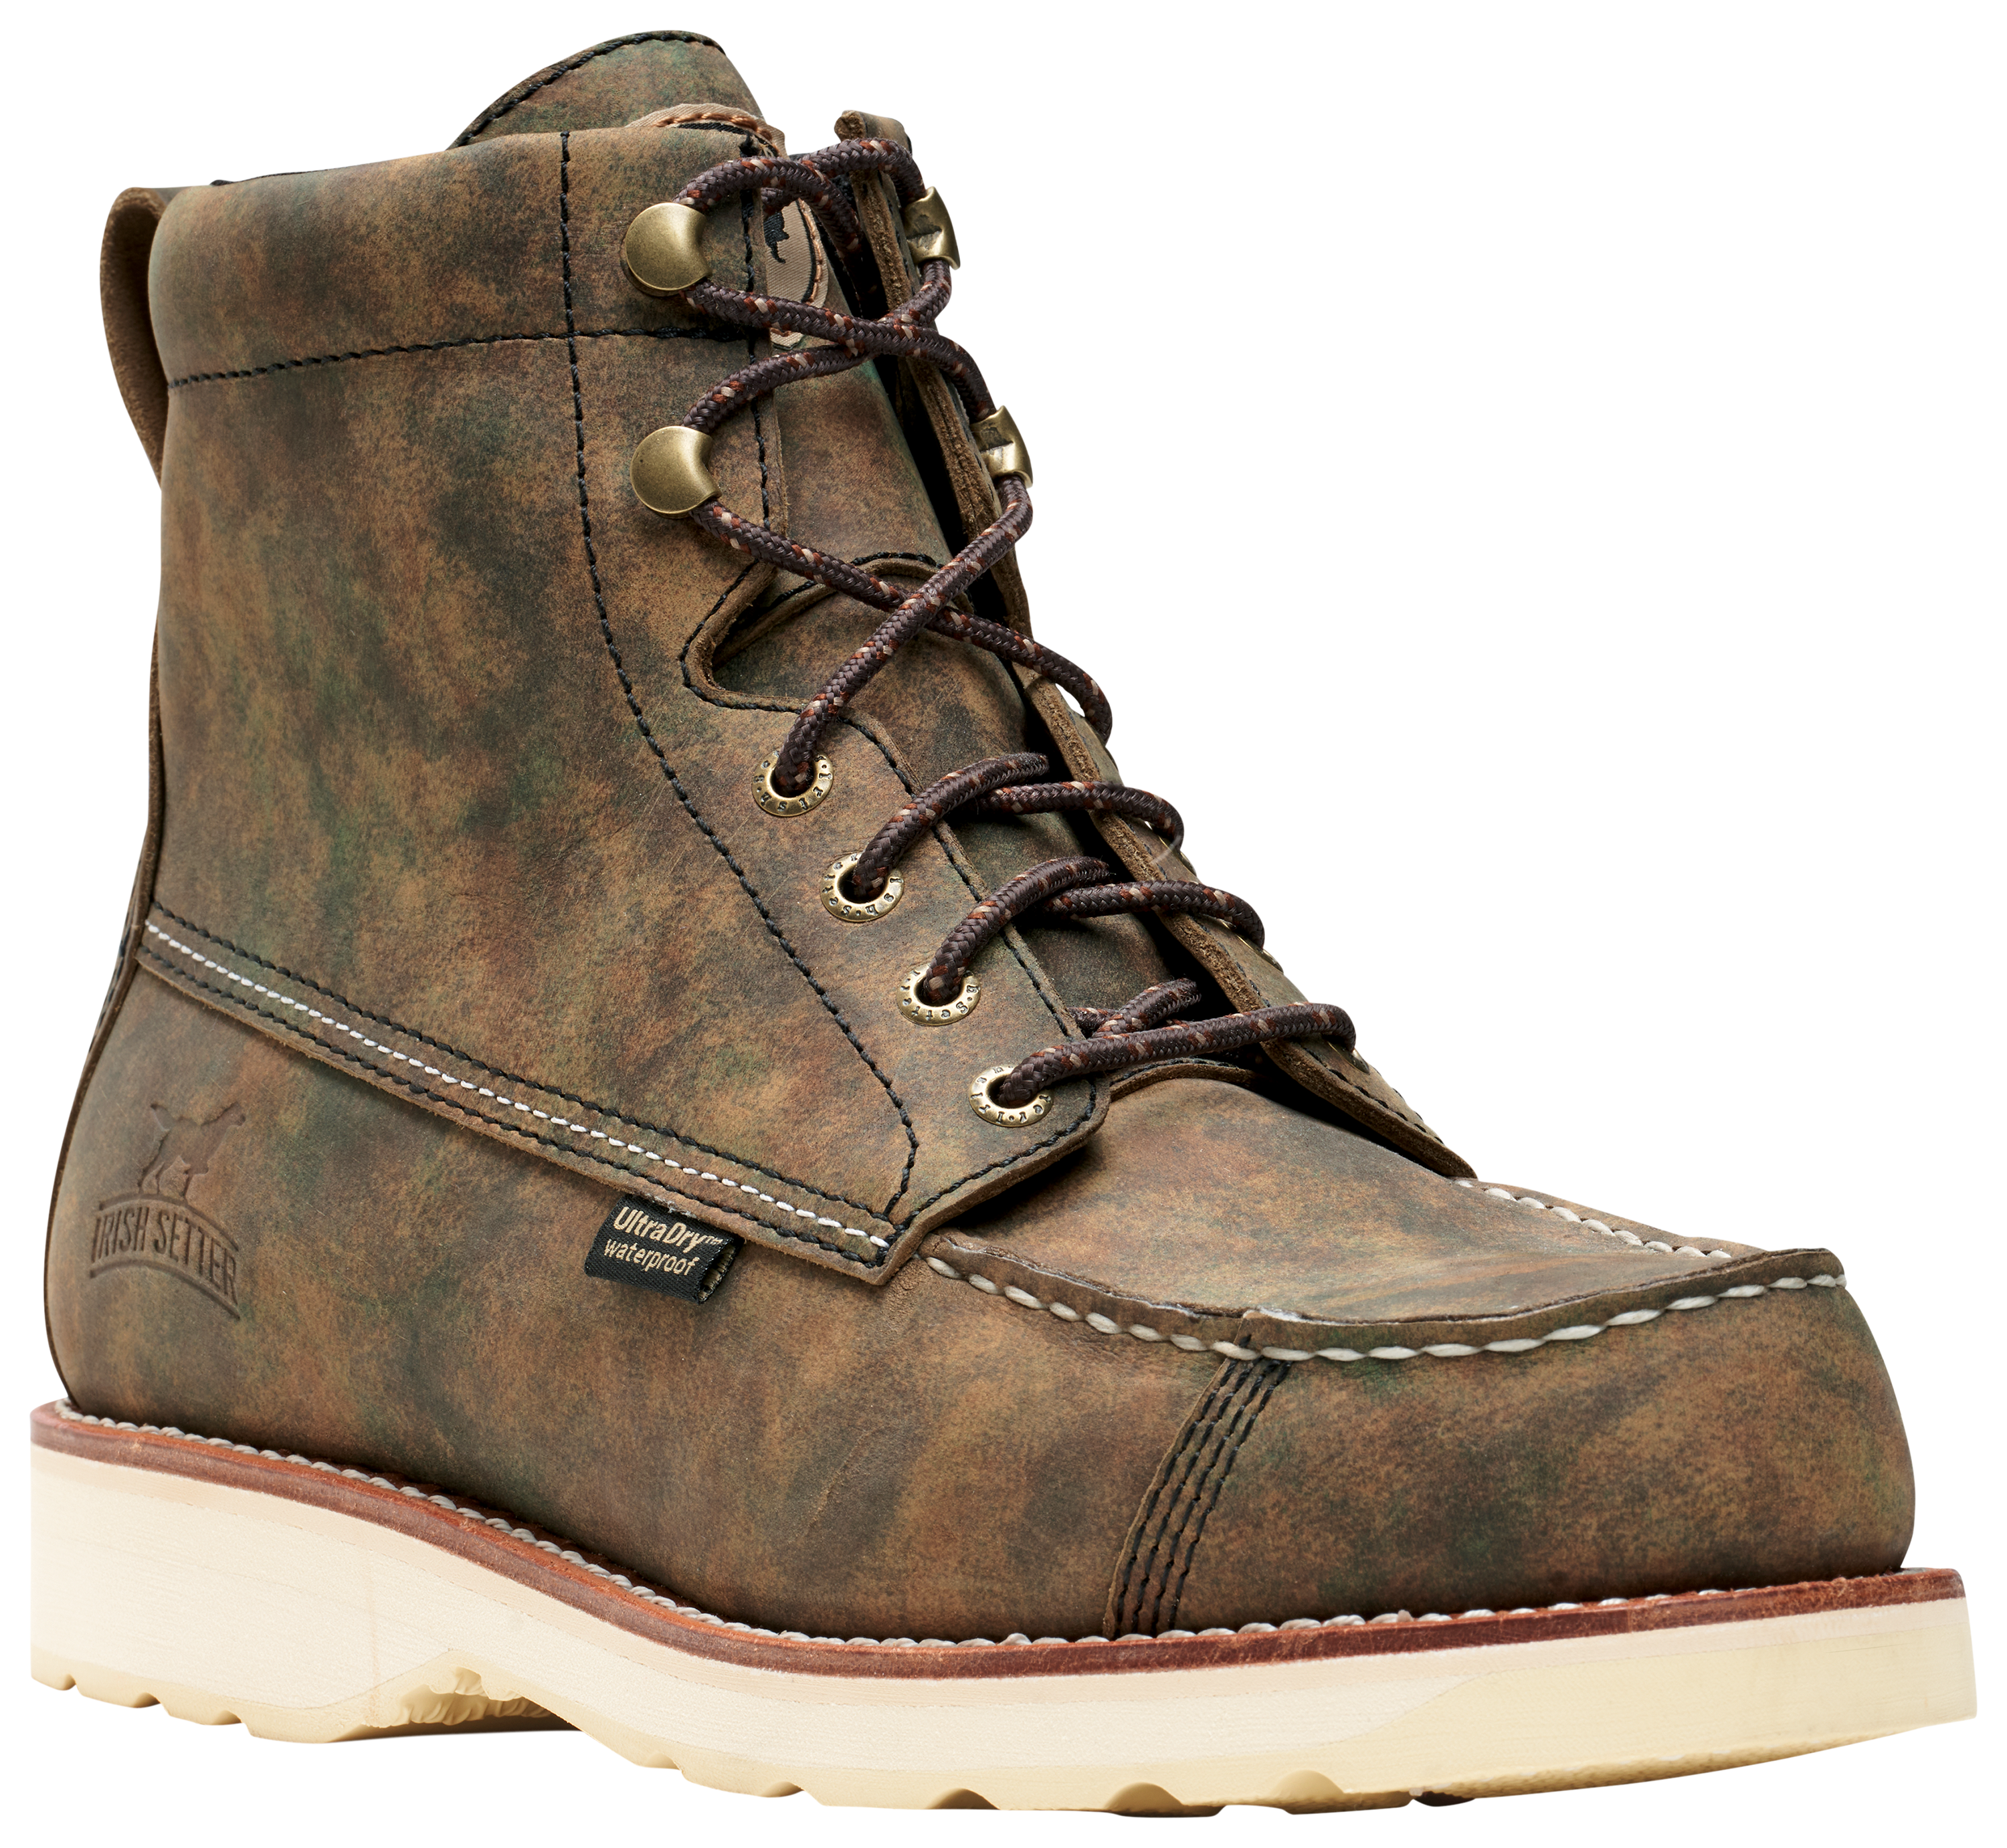 Irish Setter Wingshooter 7 Waterproof Hunting Boots for Men - Earth Camo - 11.5M